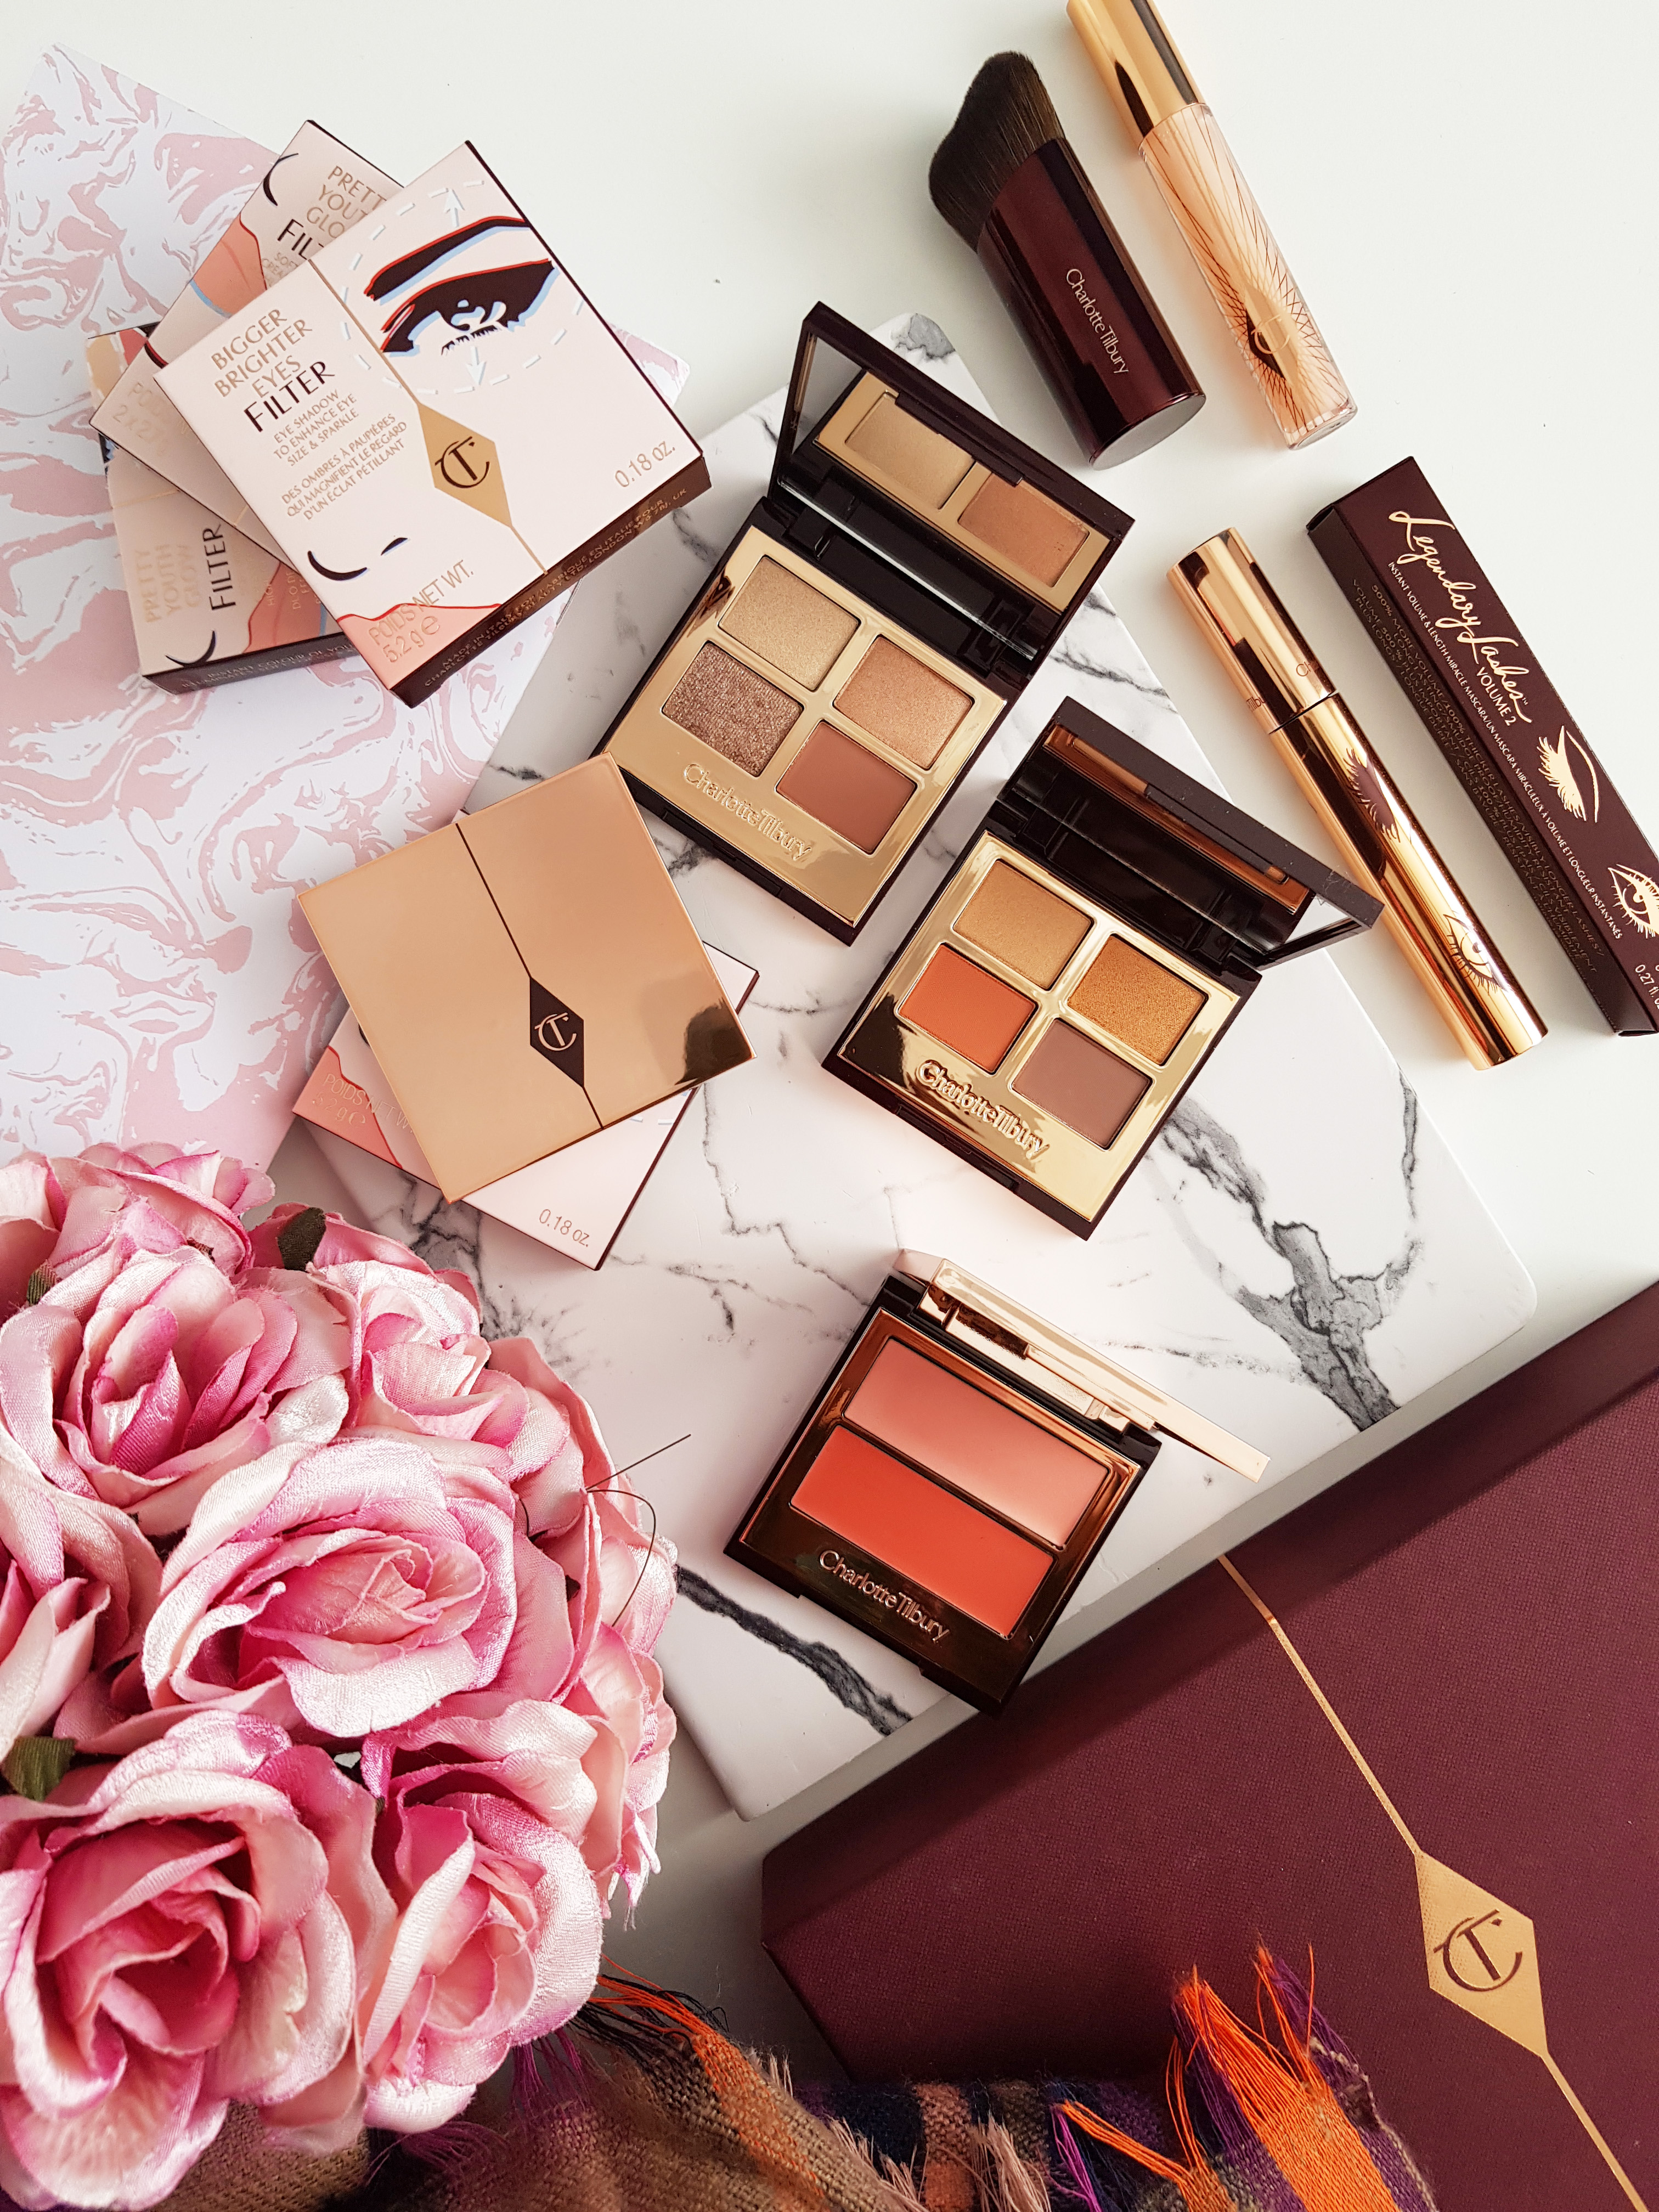 Charlotte Tilbury Beauty Filters Collection